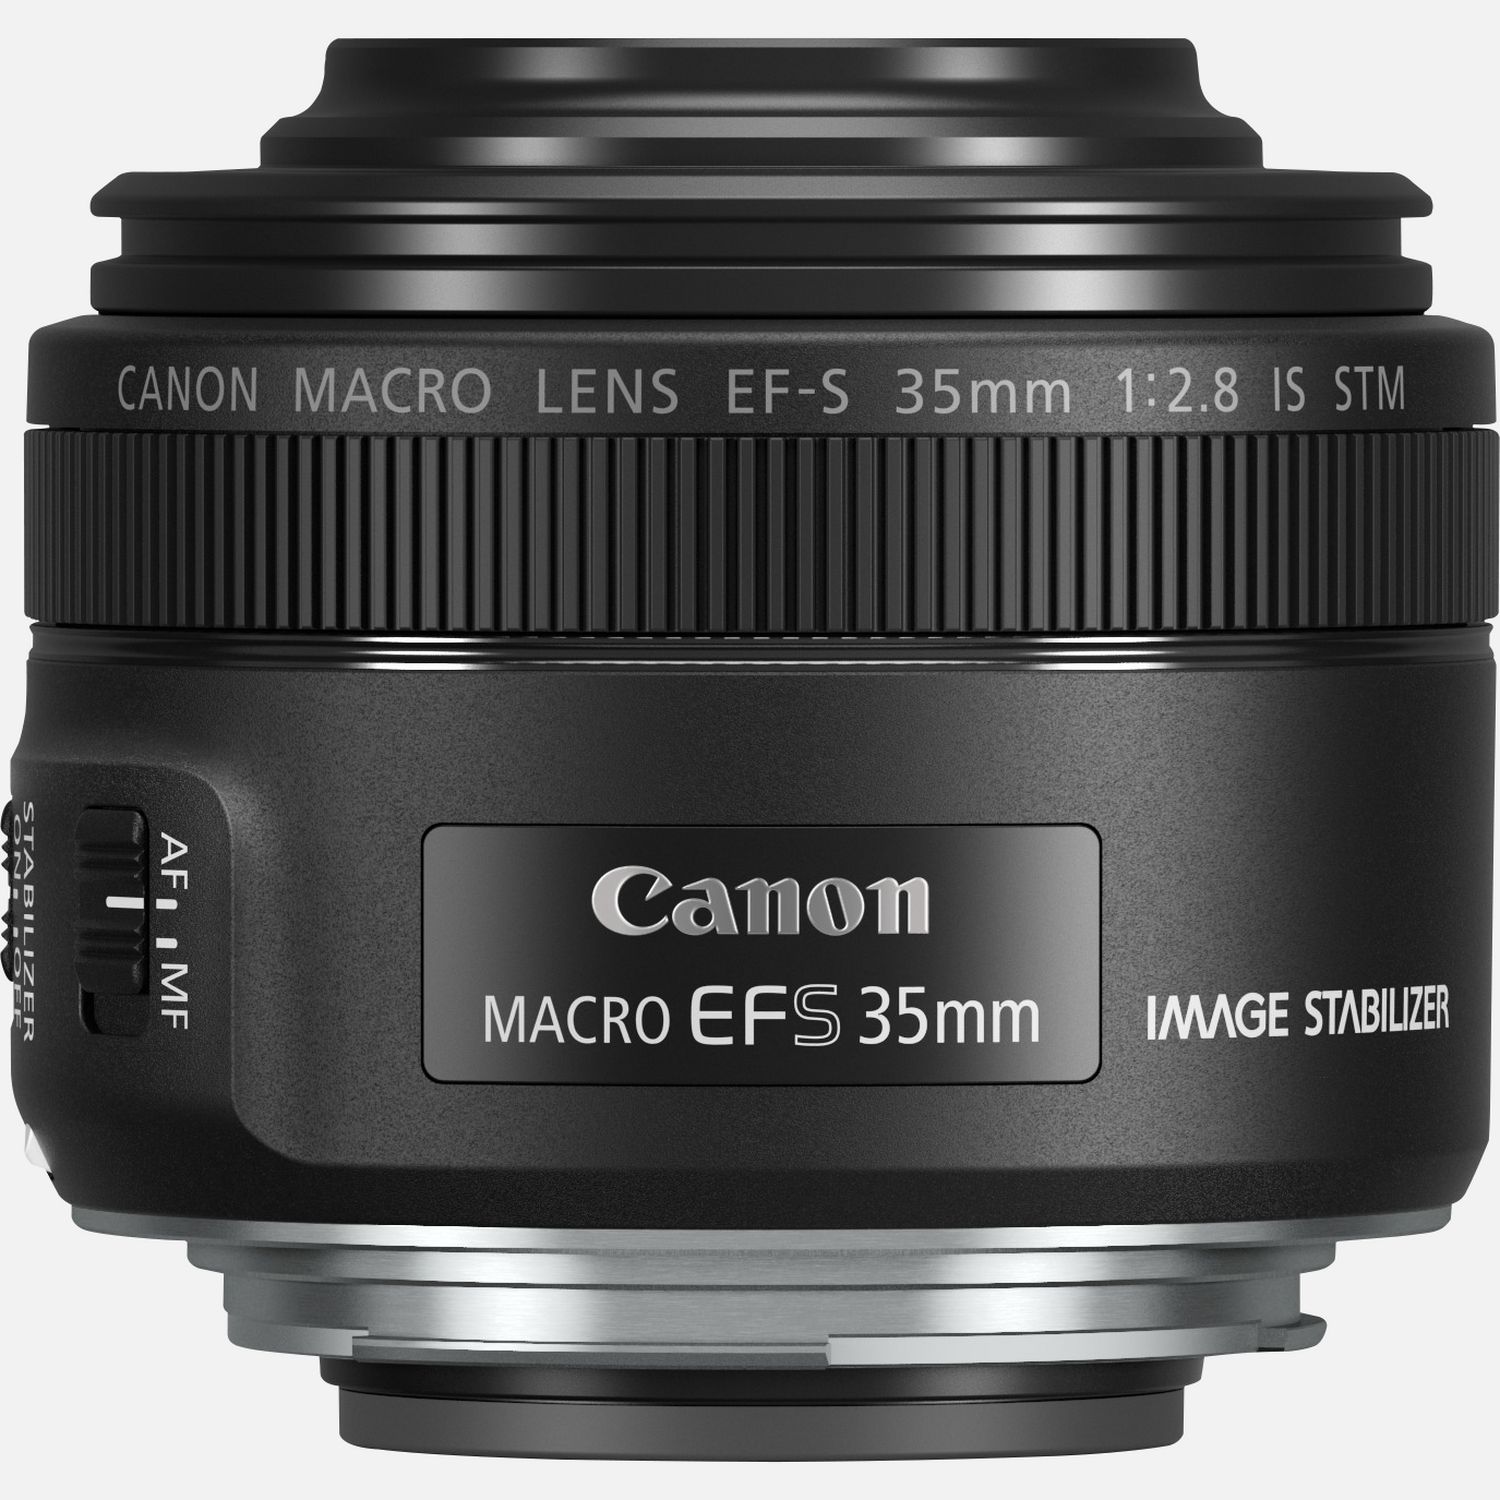 IS OY Macro Canon Discontinued — 35mm STM Buy Store f/2.8 in EF-S Canon Lens